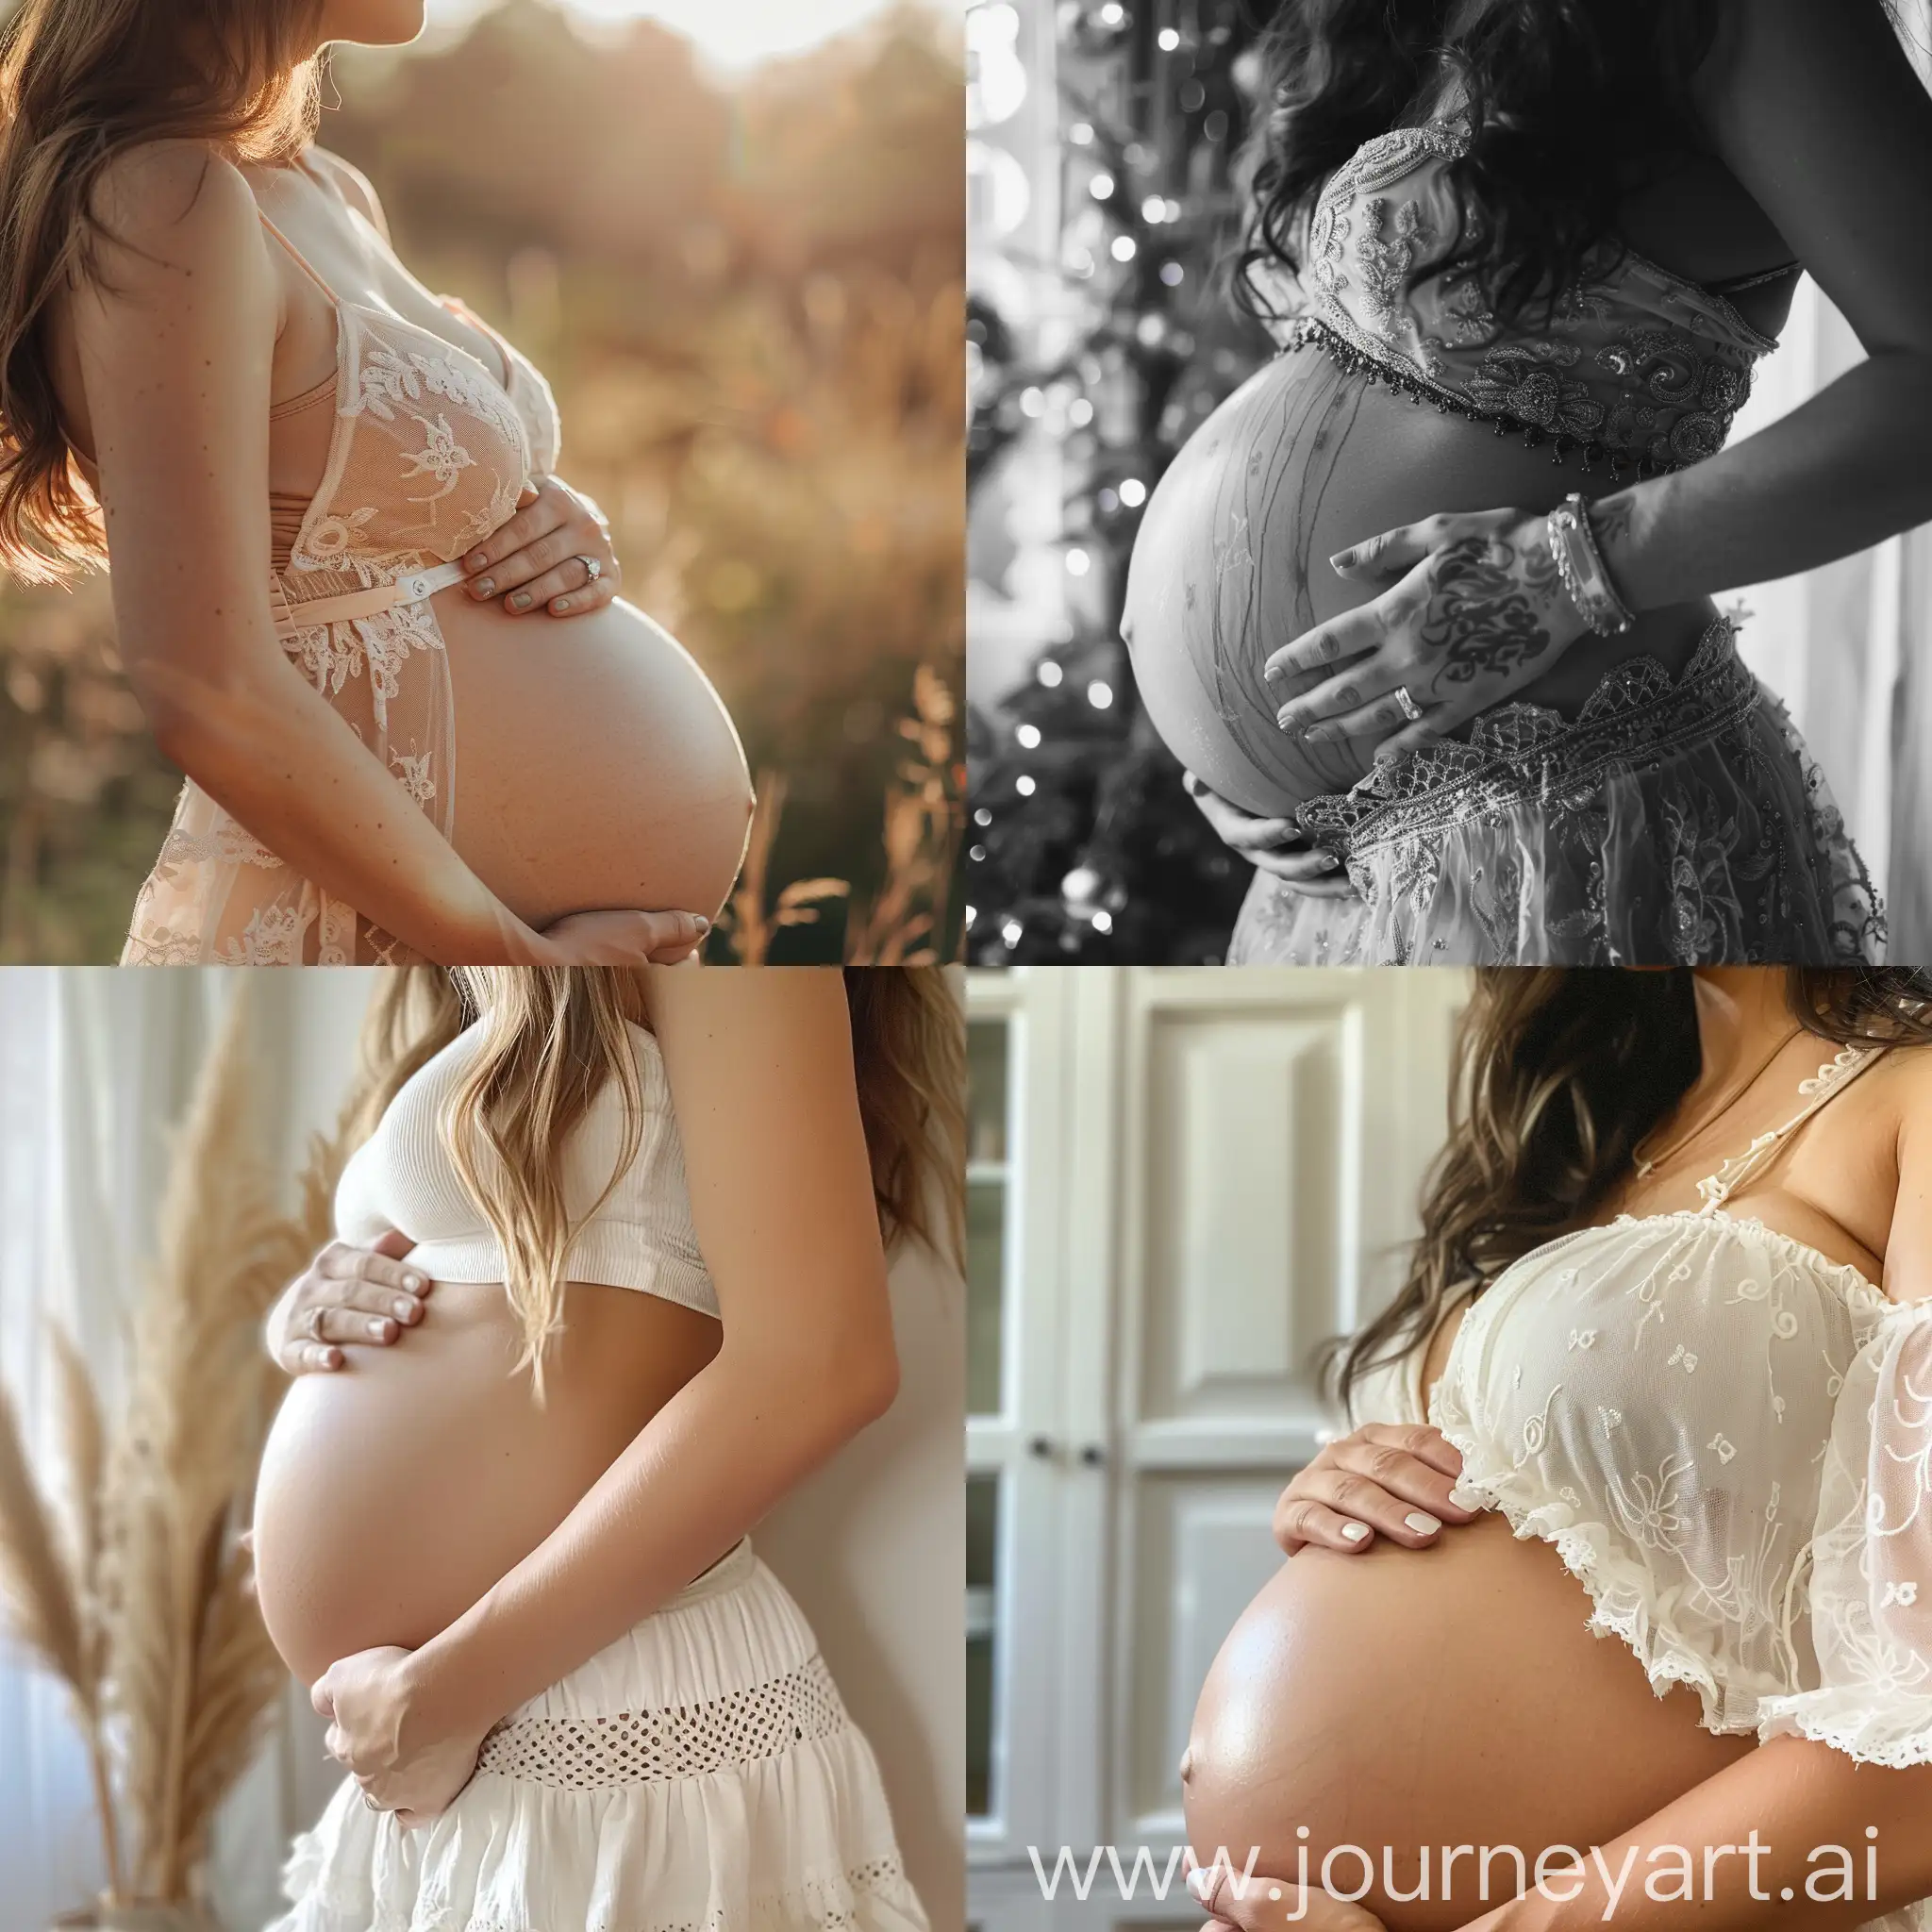 Side-View-of-Pregnant-Womans-Belly-Maternity-Expectation-Concept